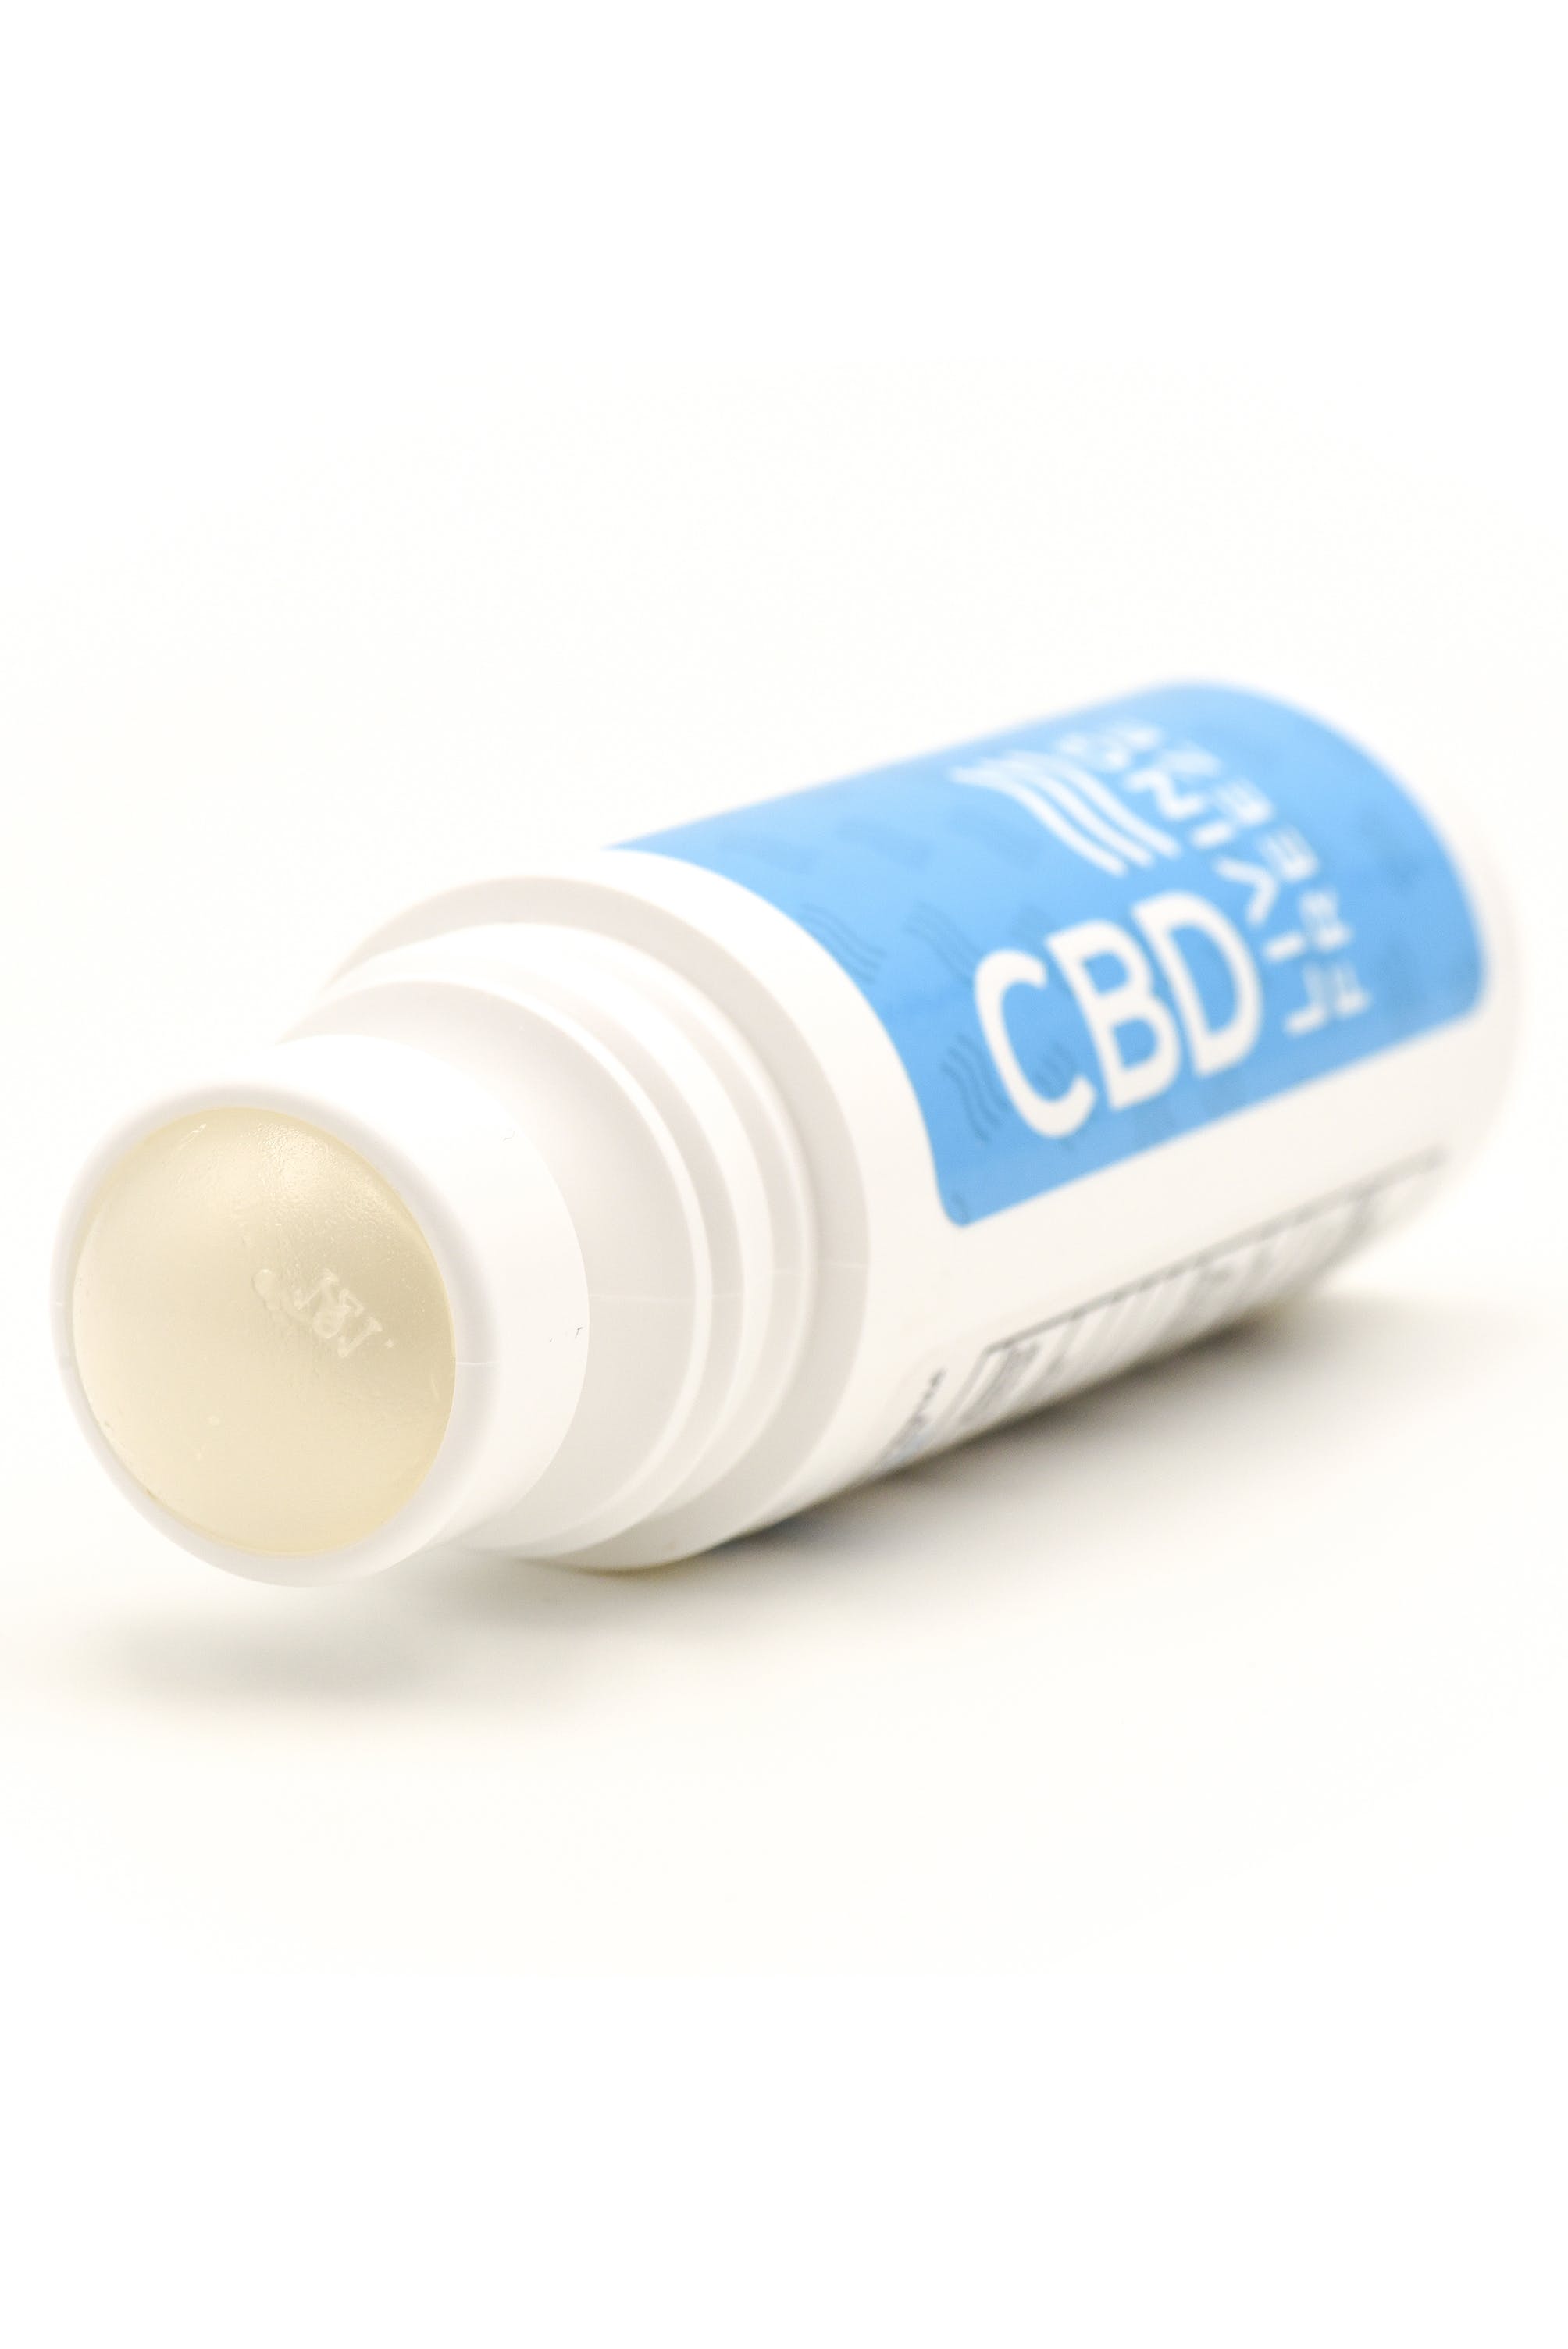 topicals-cbd-living-freeze-roll-on-pain-relief